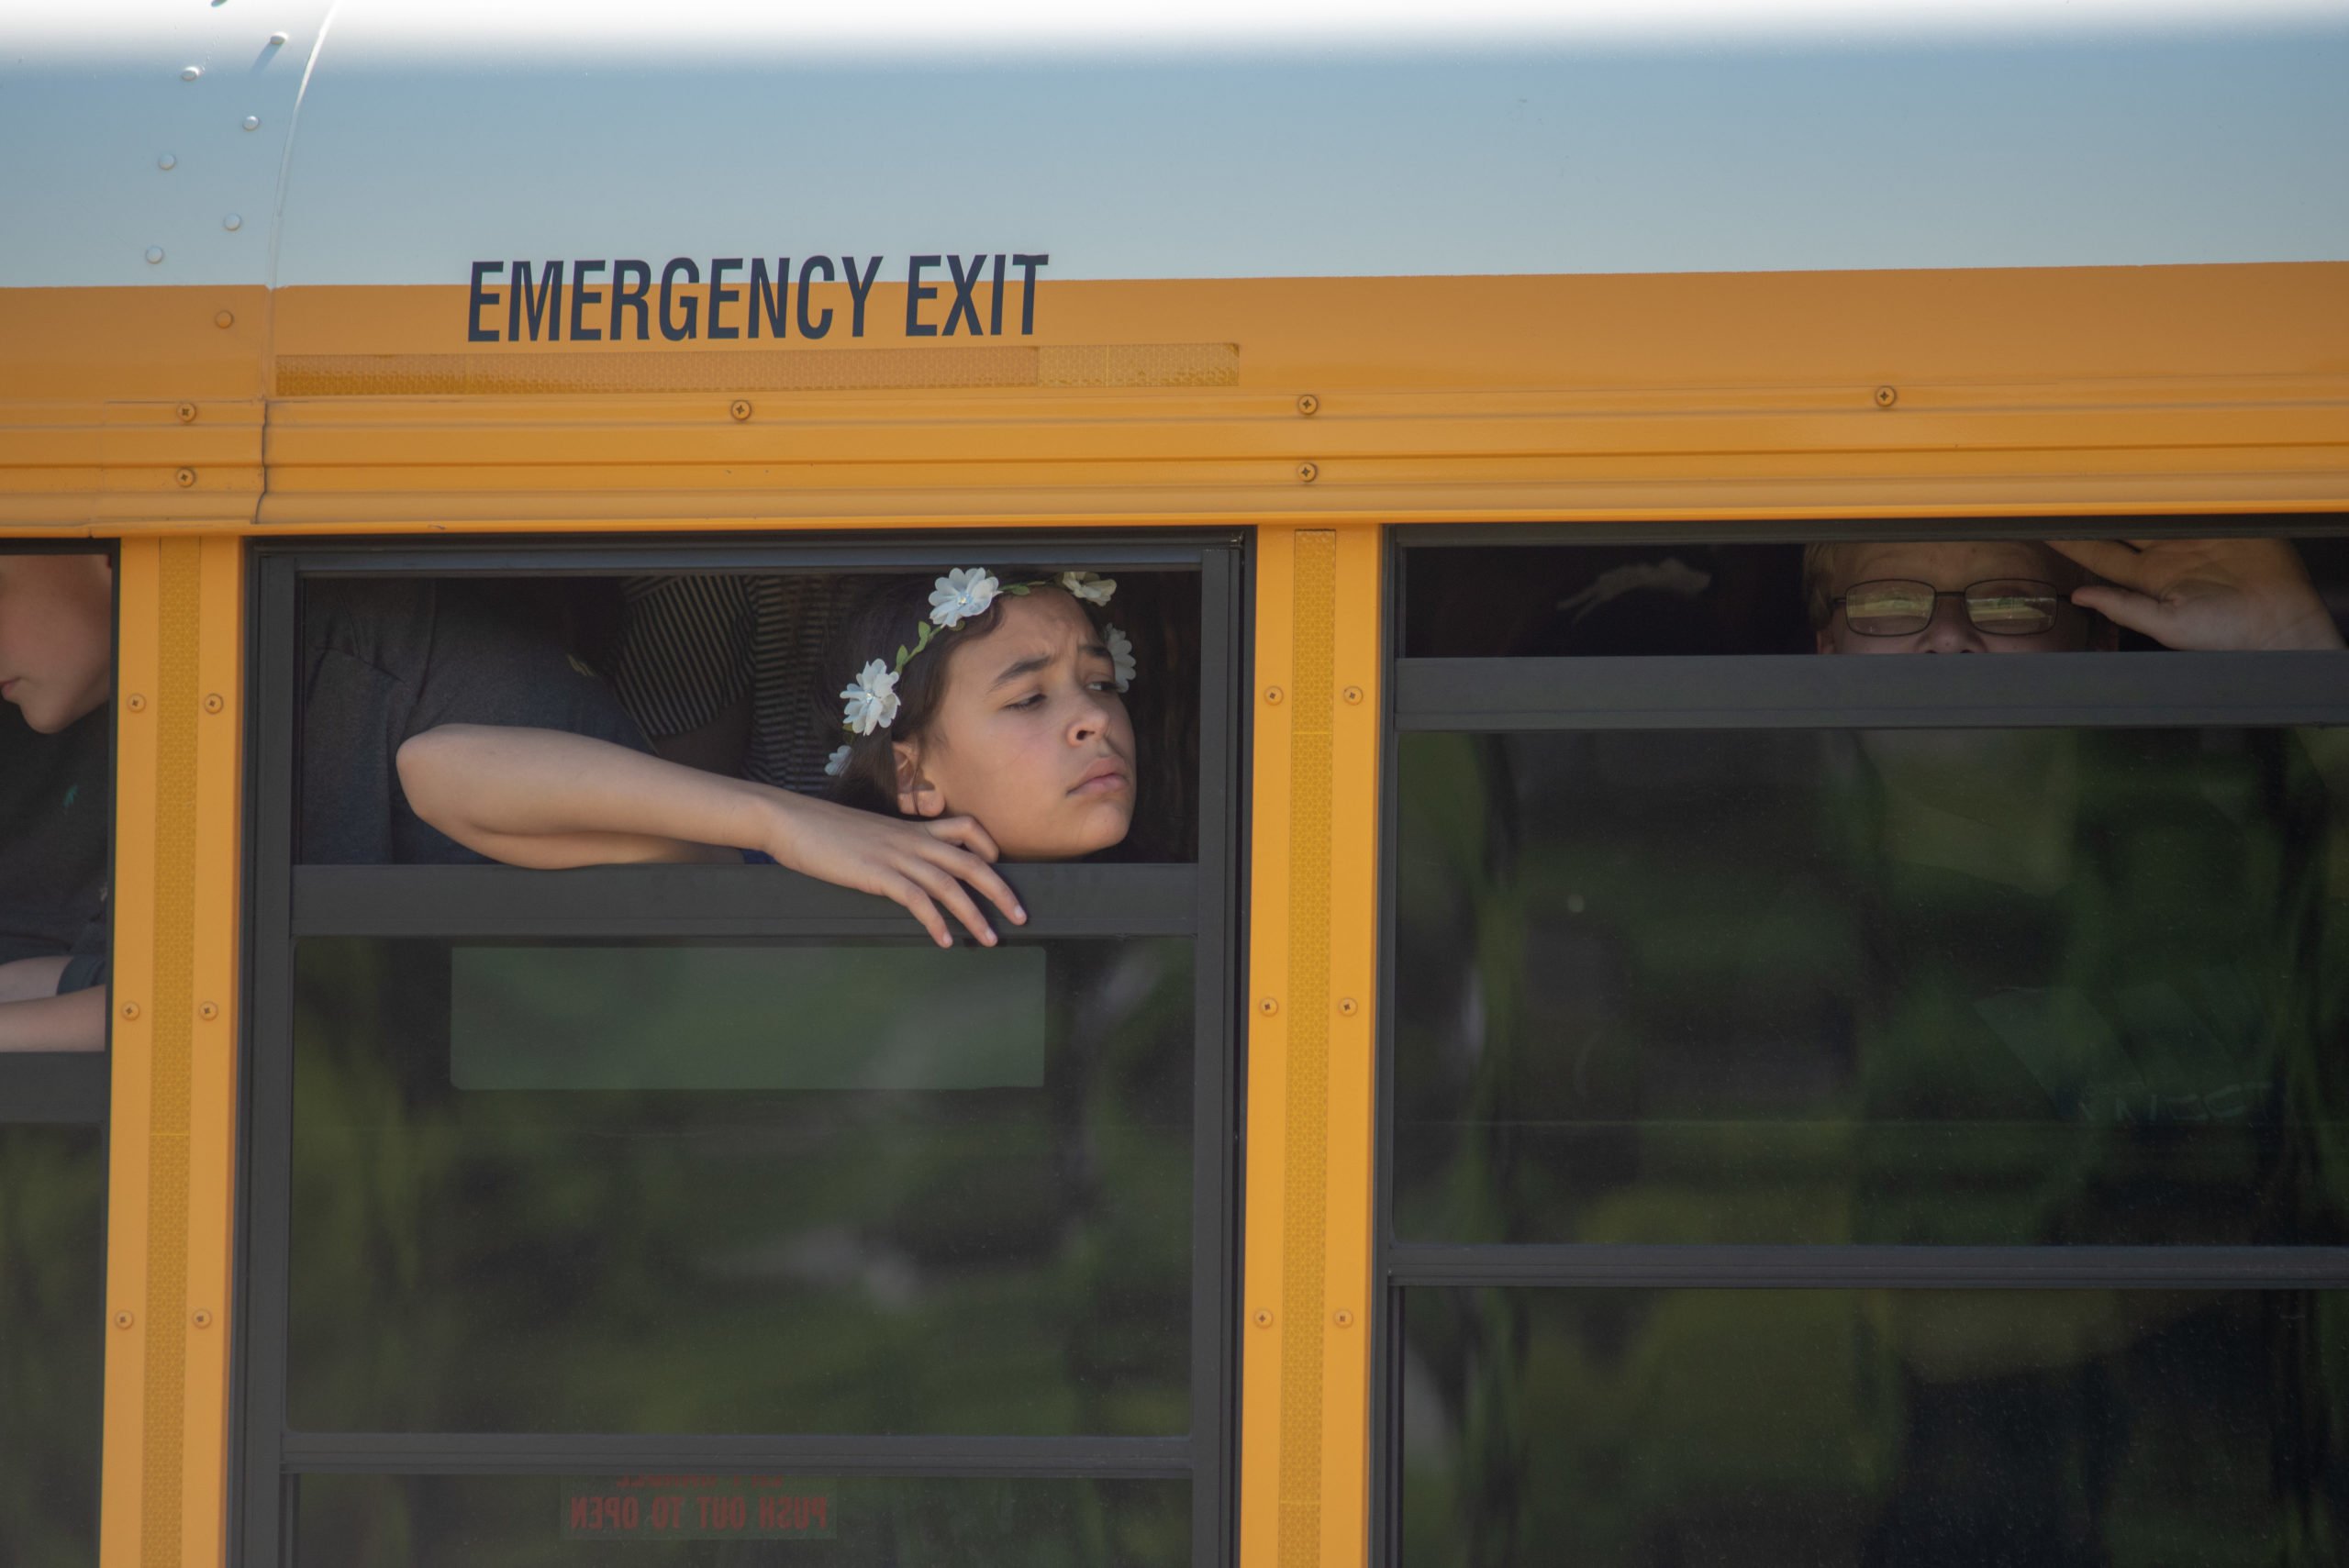 Evacuated middle school students wait on a bus outside Noblesville High School after a shooting at Noblesville West Middle School on May 25, 2018 in Noblesville, Indiana. Middle school students were taken to the high school for reunion with their parents. One teacher and one student were initially reported injured. (Photo by Kevin Moloney/Getty Images)